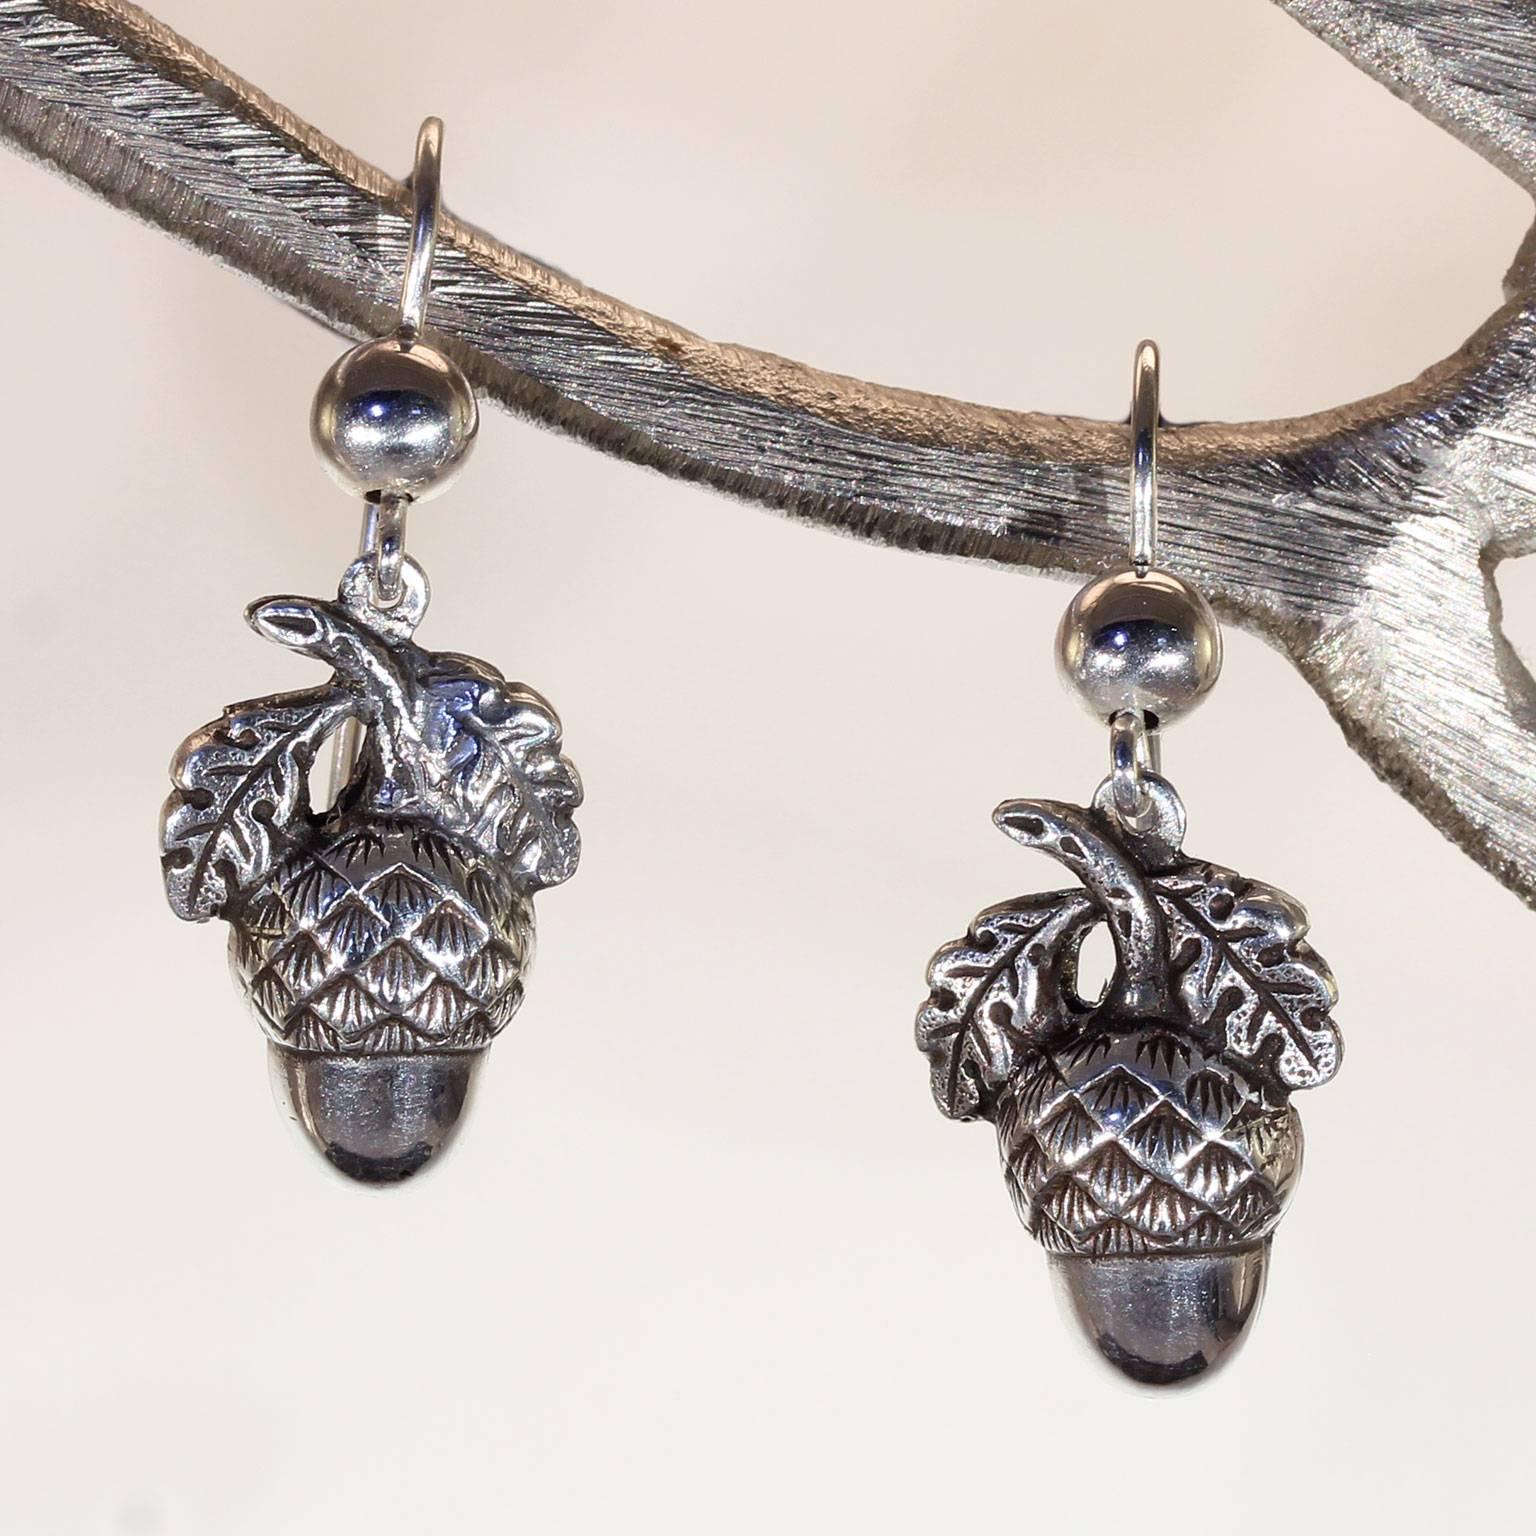 These adorable antique late Victorian silver acorn earrings were handcrafted around the year 1900. They are lovely nature-inspired earrings that represent life, fertility, and immortality. Acorns are the seed of the sturdy and tall oak tree, a tree